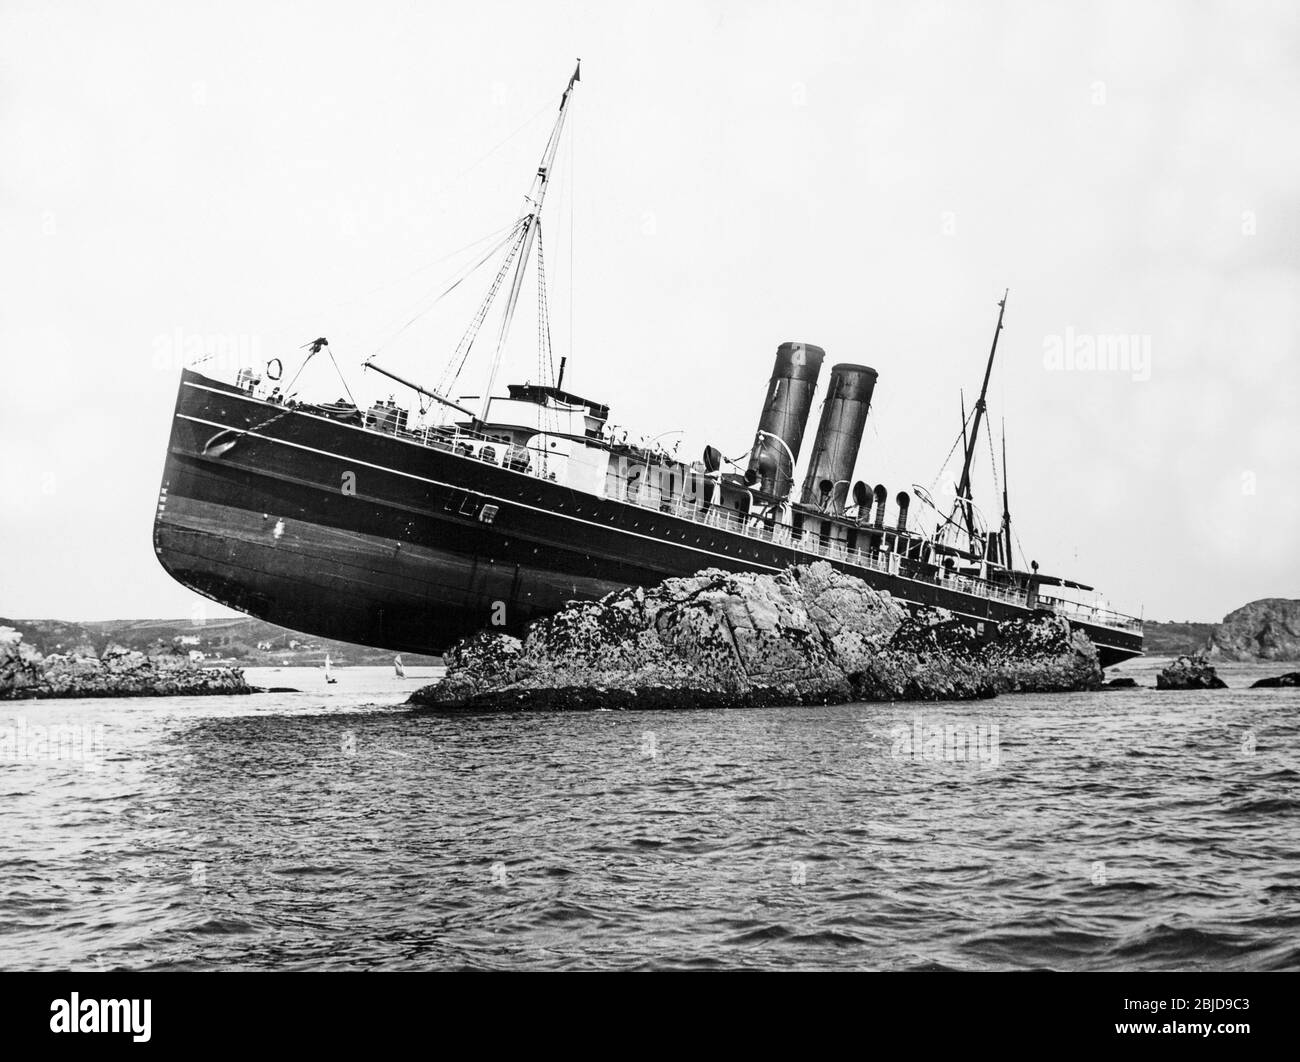 Vintage early twentieth century black and white photograph showing a steam powered cruise ship which has run aground on some rocks. The ship has two funnels, but has no name. Stock Photo